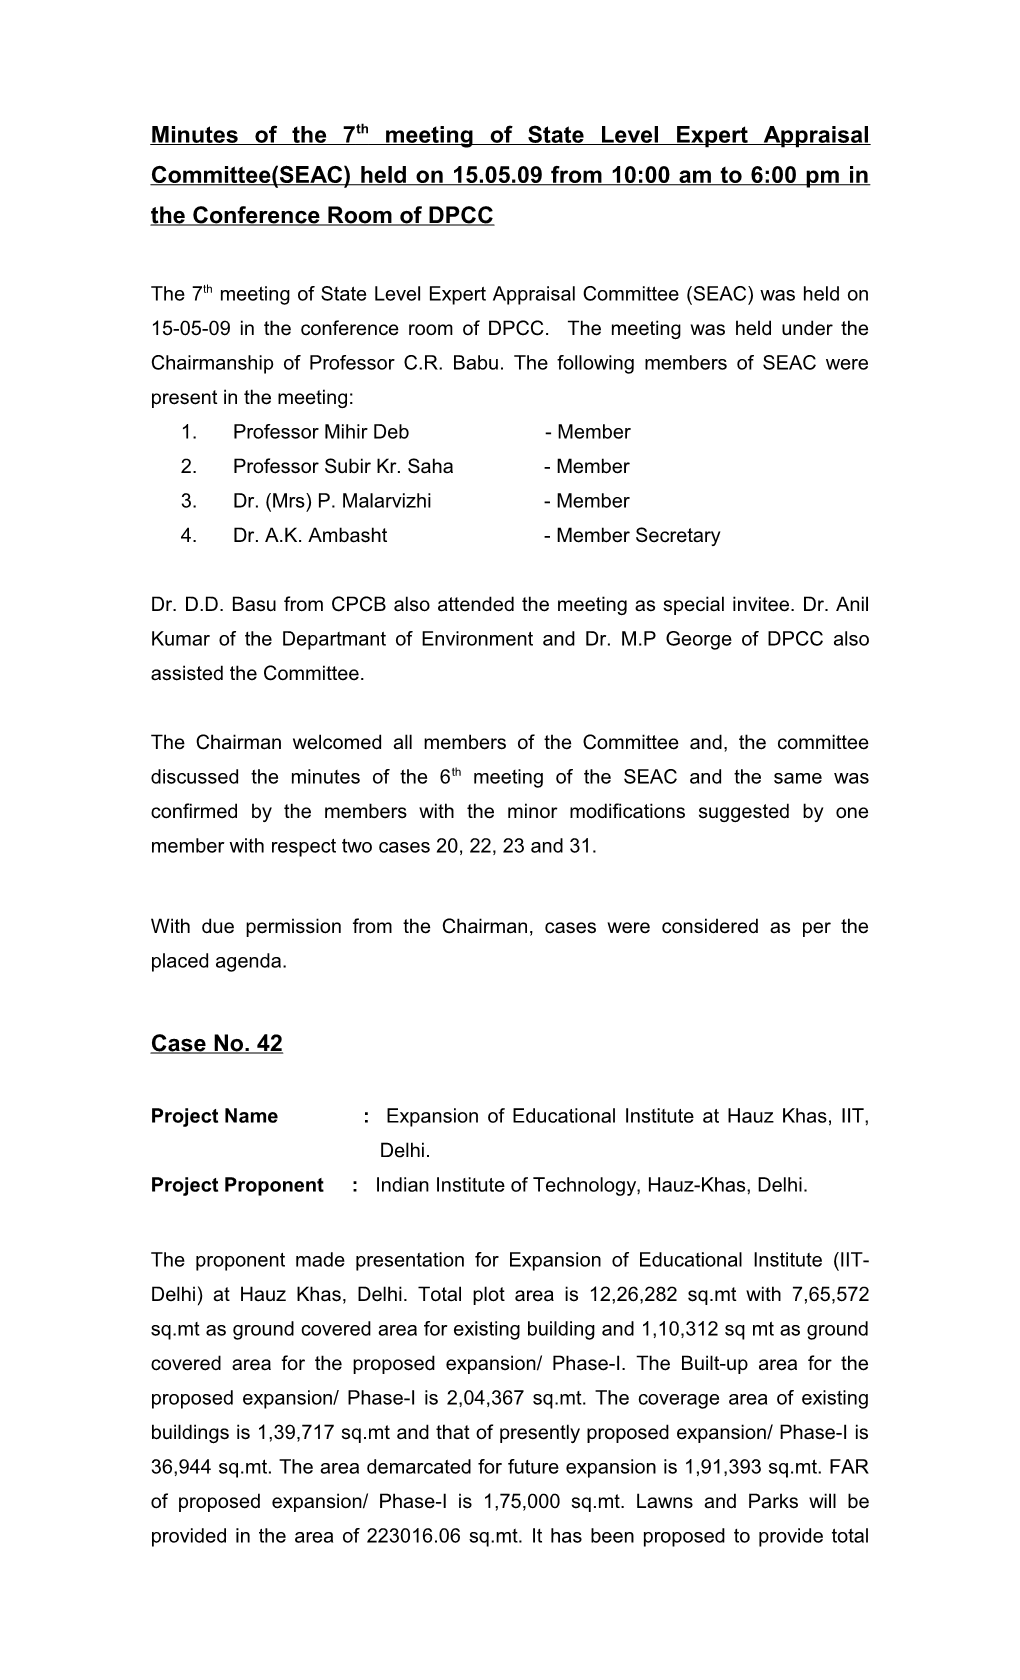 Minutes of the 7Th Meeting of State Level Expert Appraisal Committee(SEAC) Held on 15.05.09